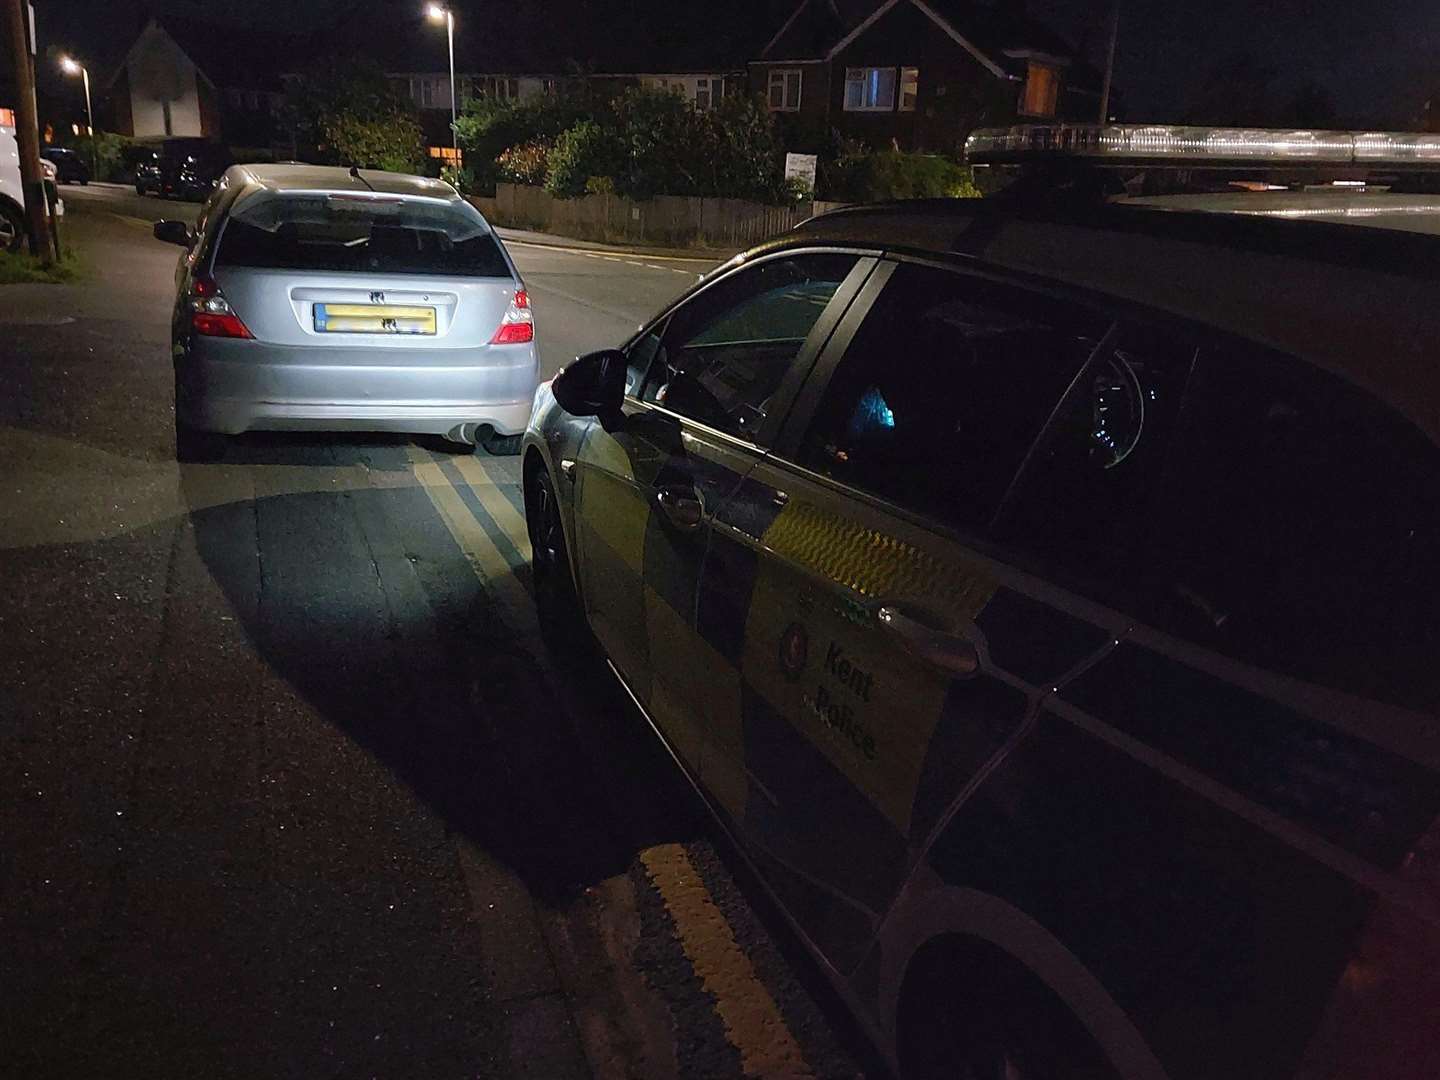 The driver was pulled over after being spotted driving without lights. Photo: @KentPoliceAsh